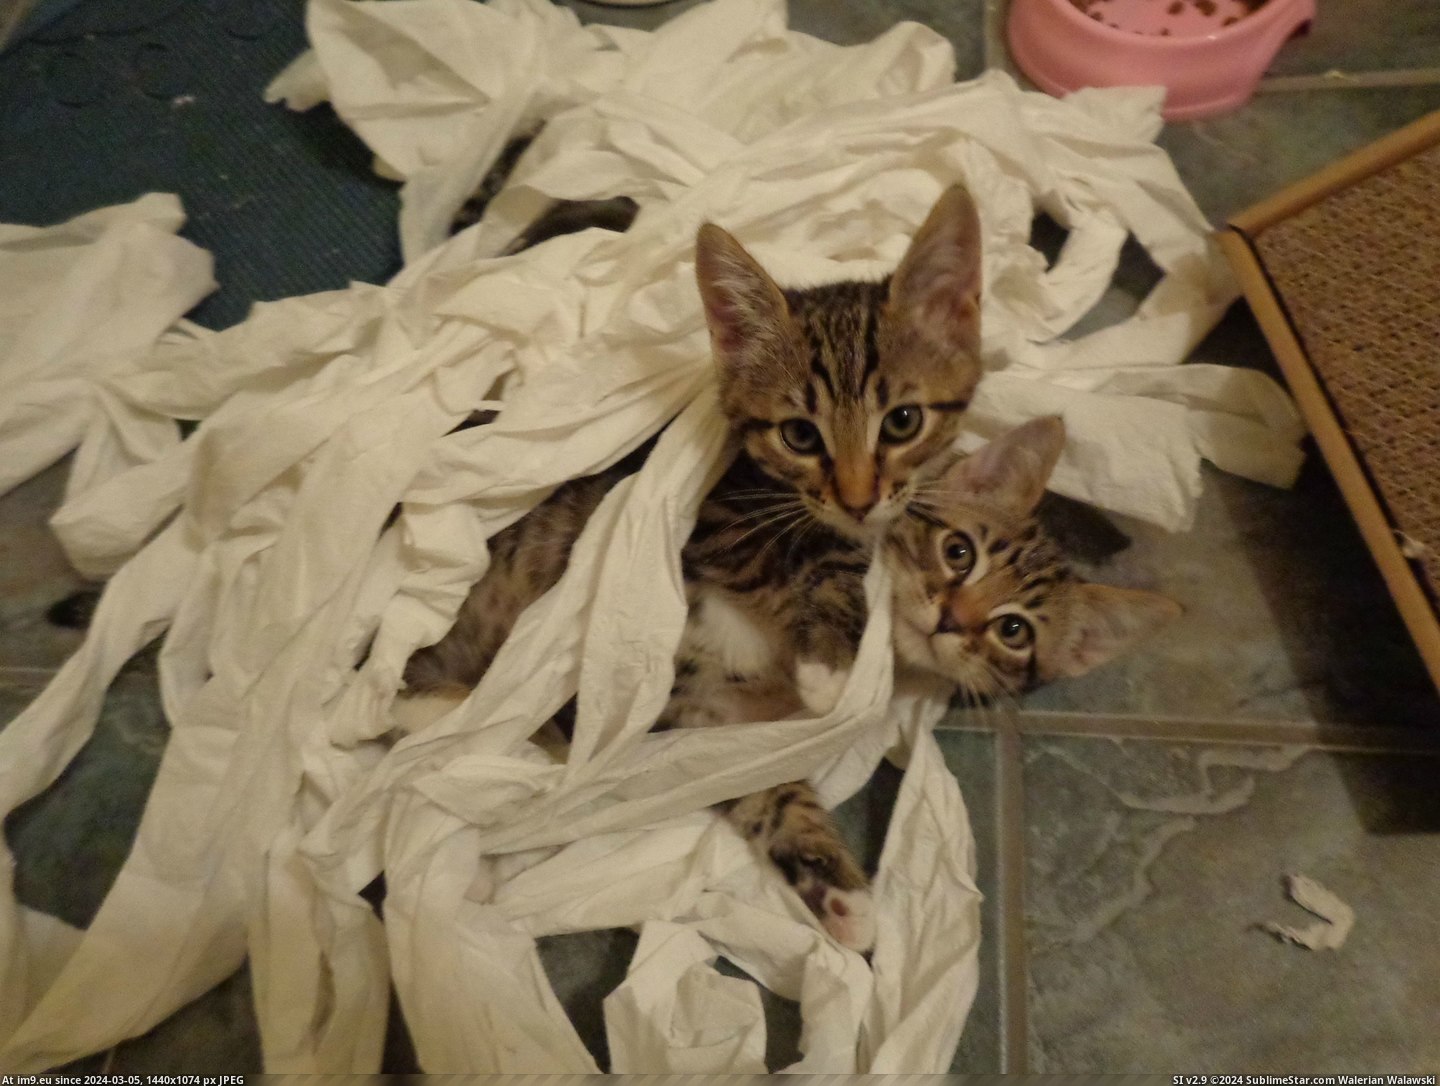 #New #Toilet #Roll #Discovered #Kittens #Paper [Aww] So my new kittens discovered the toilet paper roll... Pic. (Изображение из альбом My r/AWW favs))